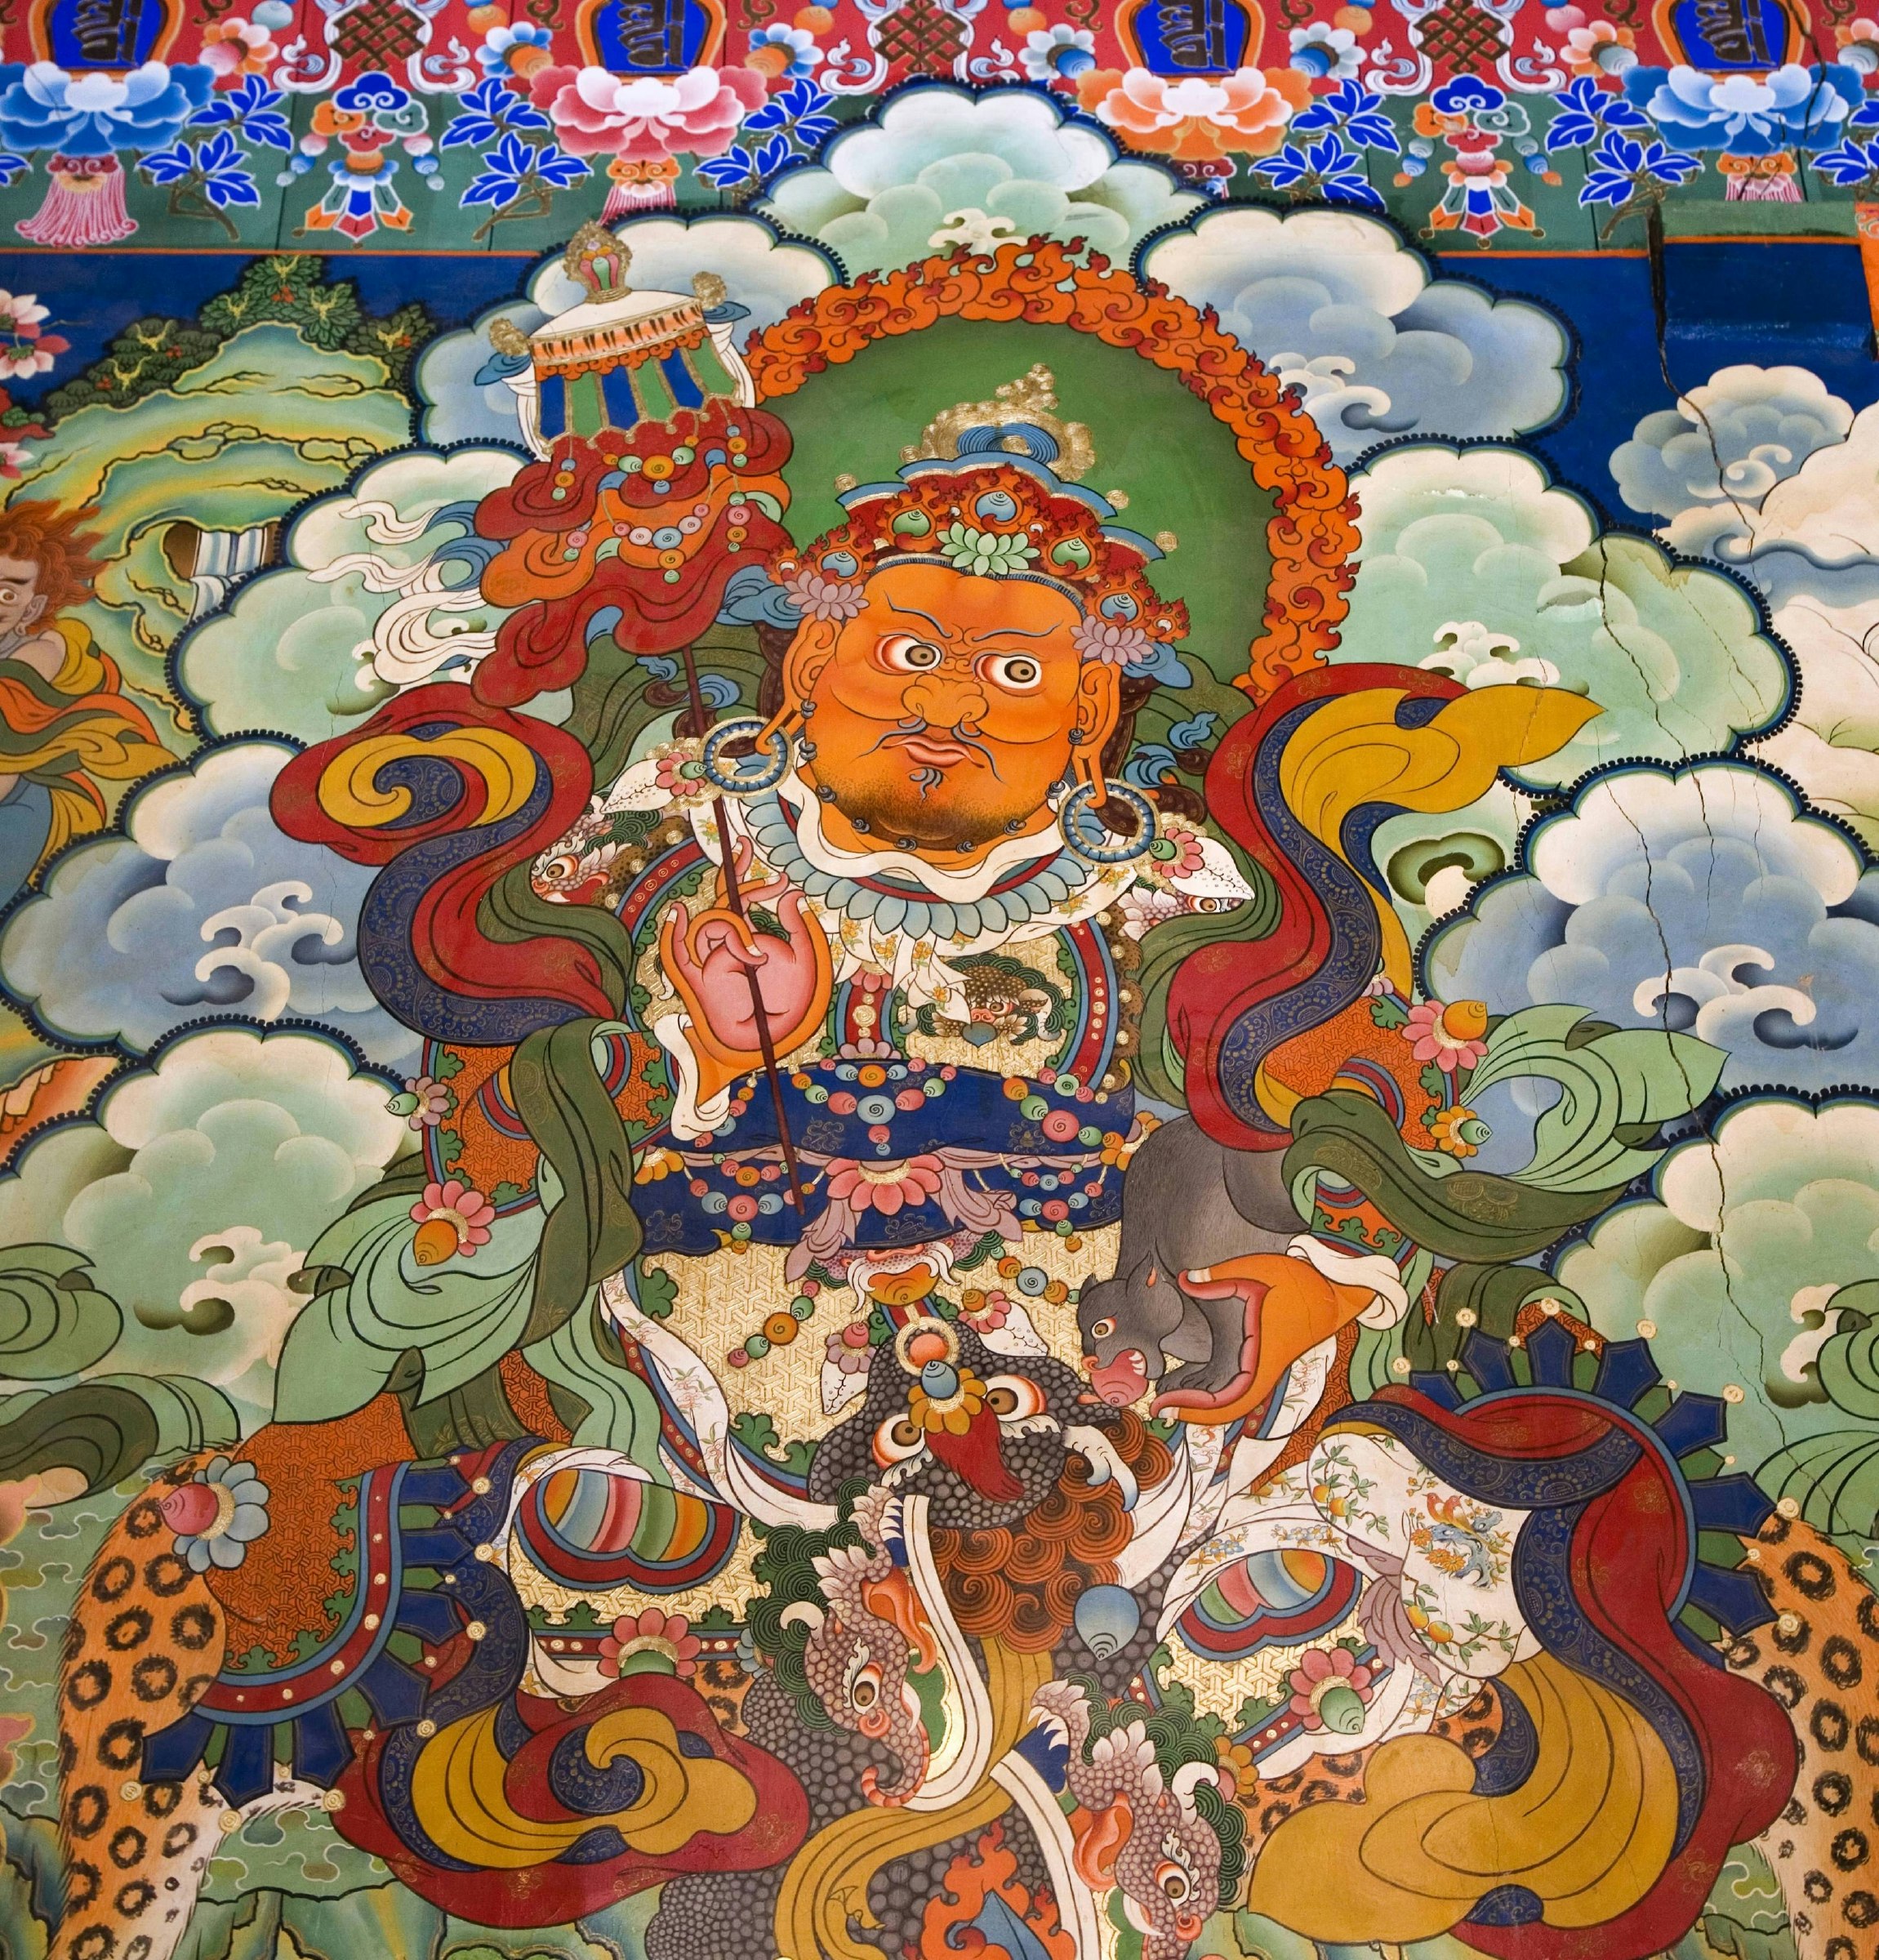 A colourful depiction of a Buddhist deity.